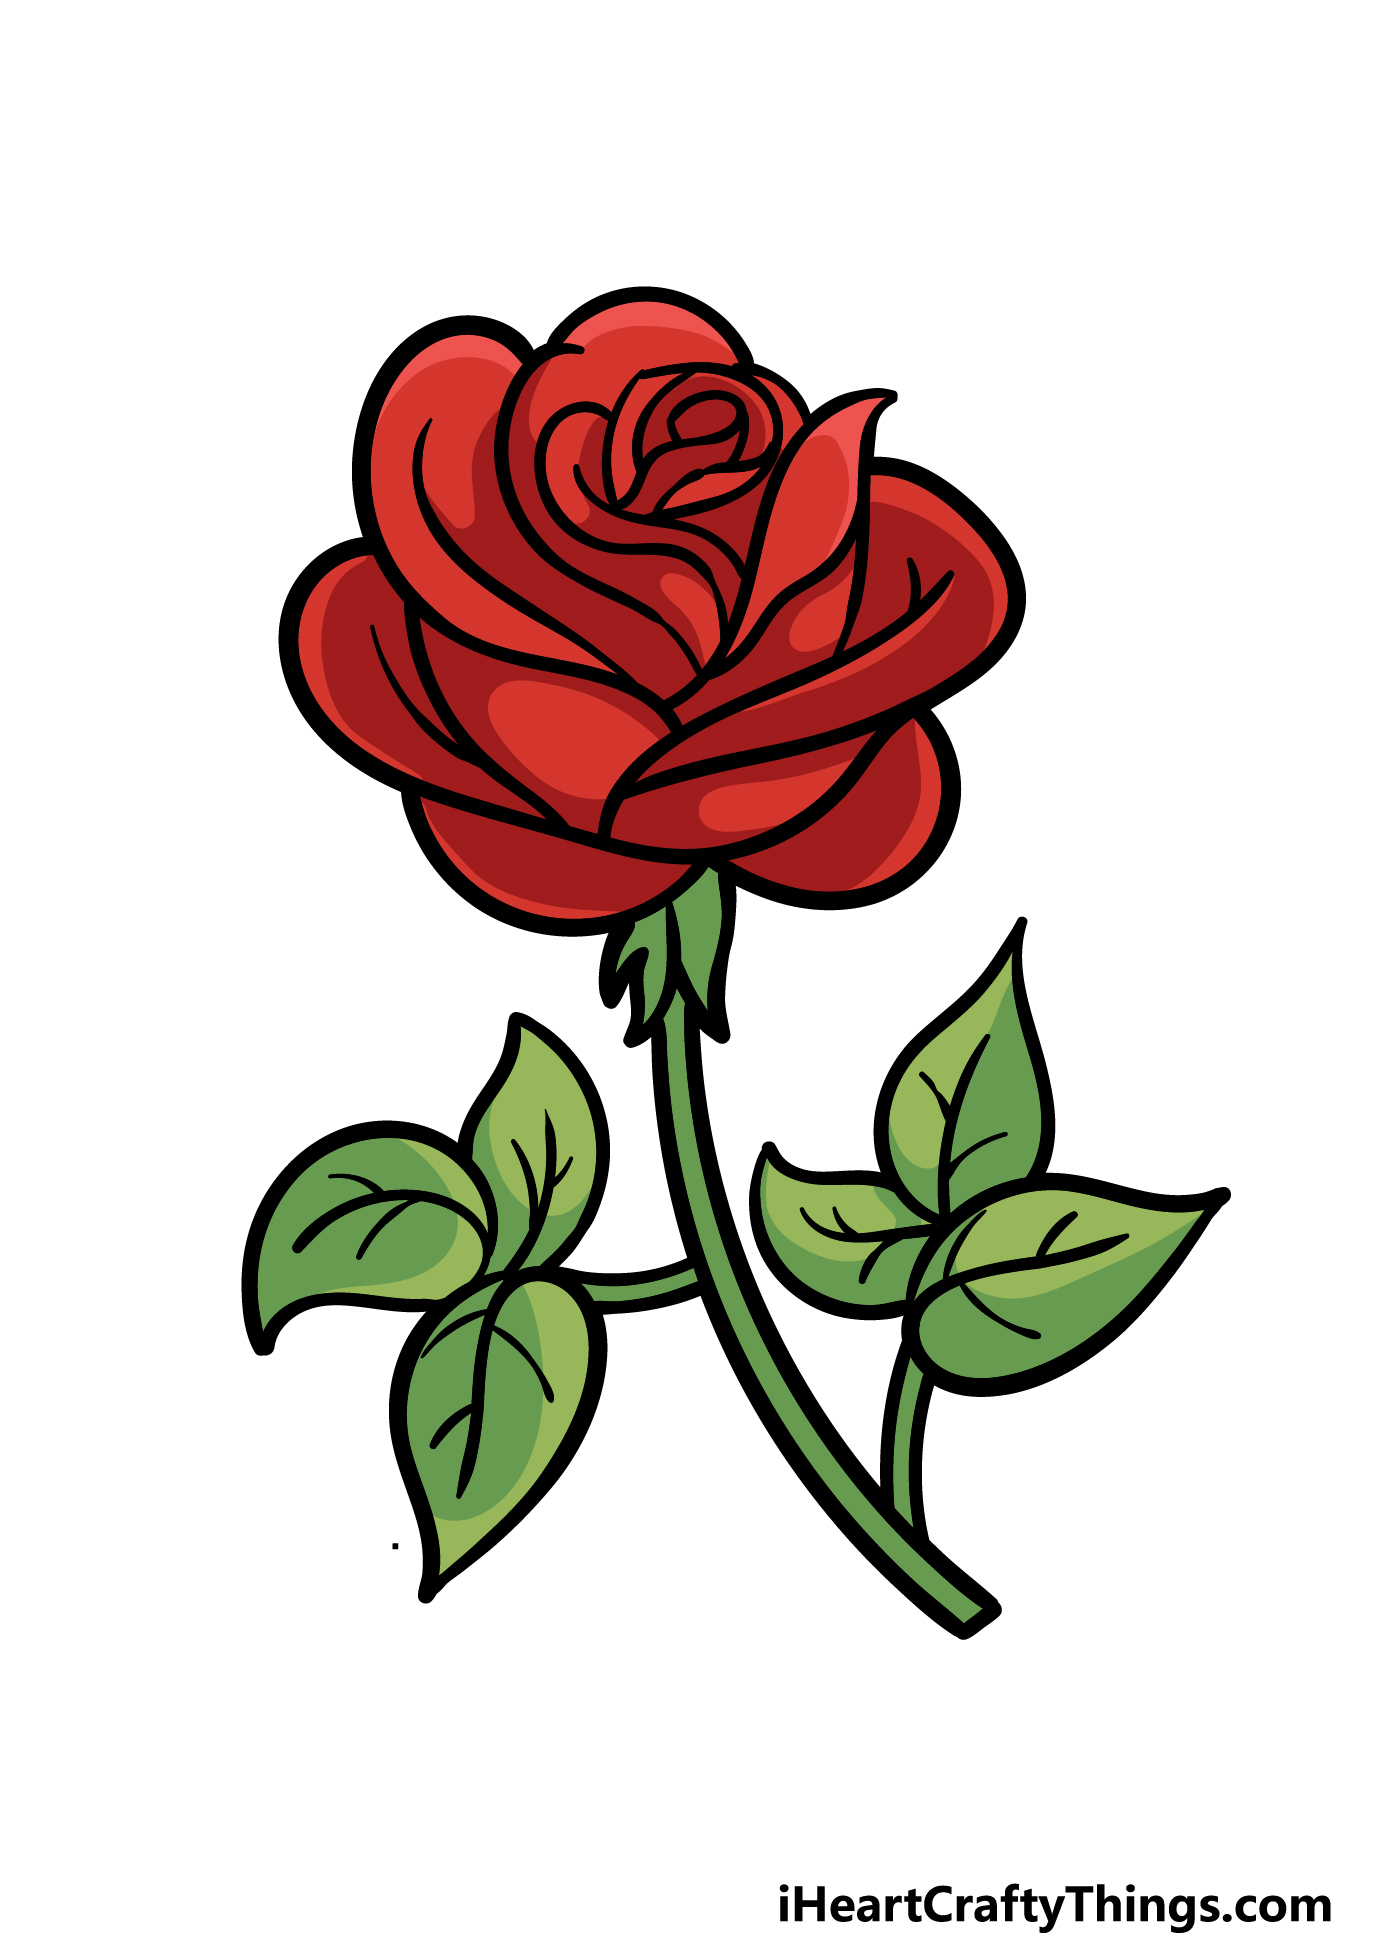 Cartoon Rose Drawing - How To Draw A Cartoon Rose Step By Step